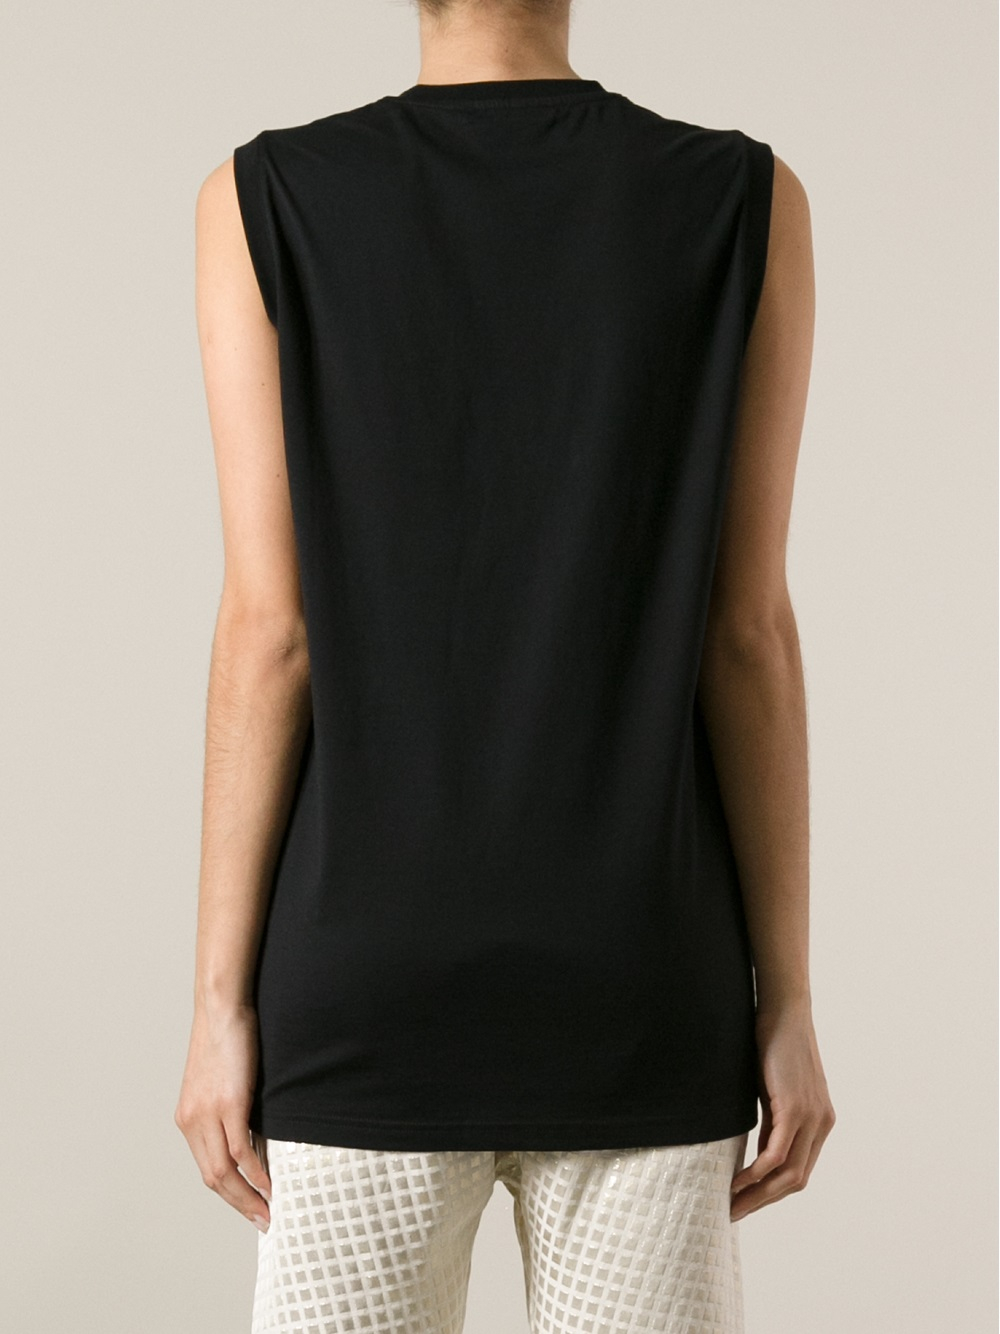 Givenchy Saint Printed Tank Top in Black - Lyst